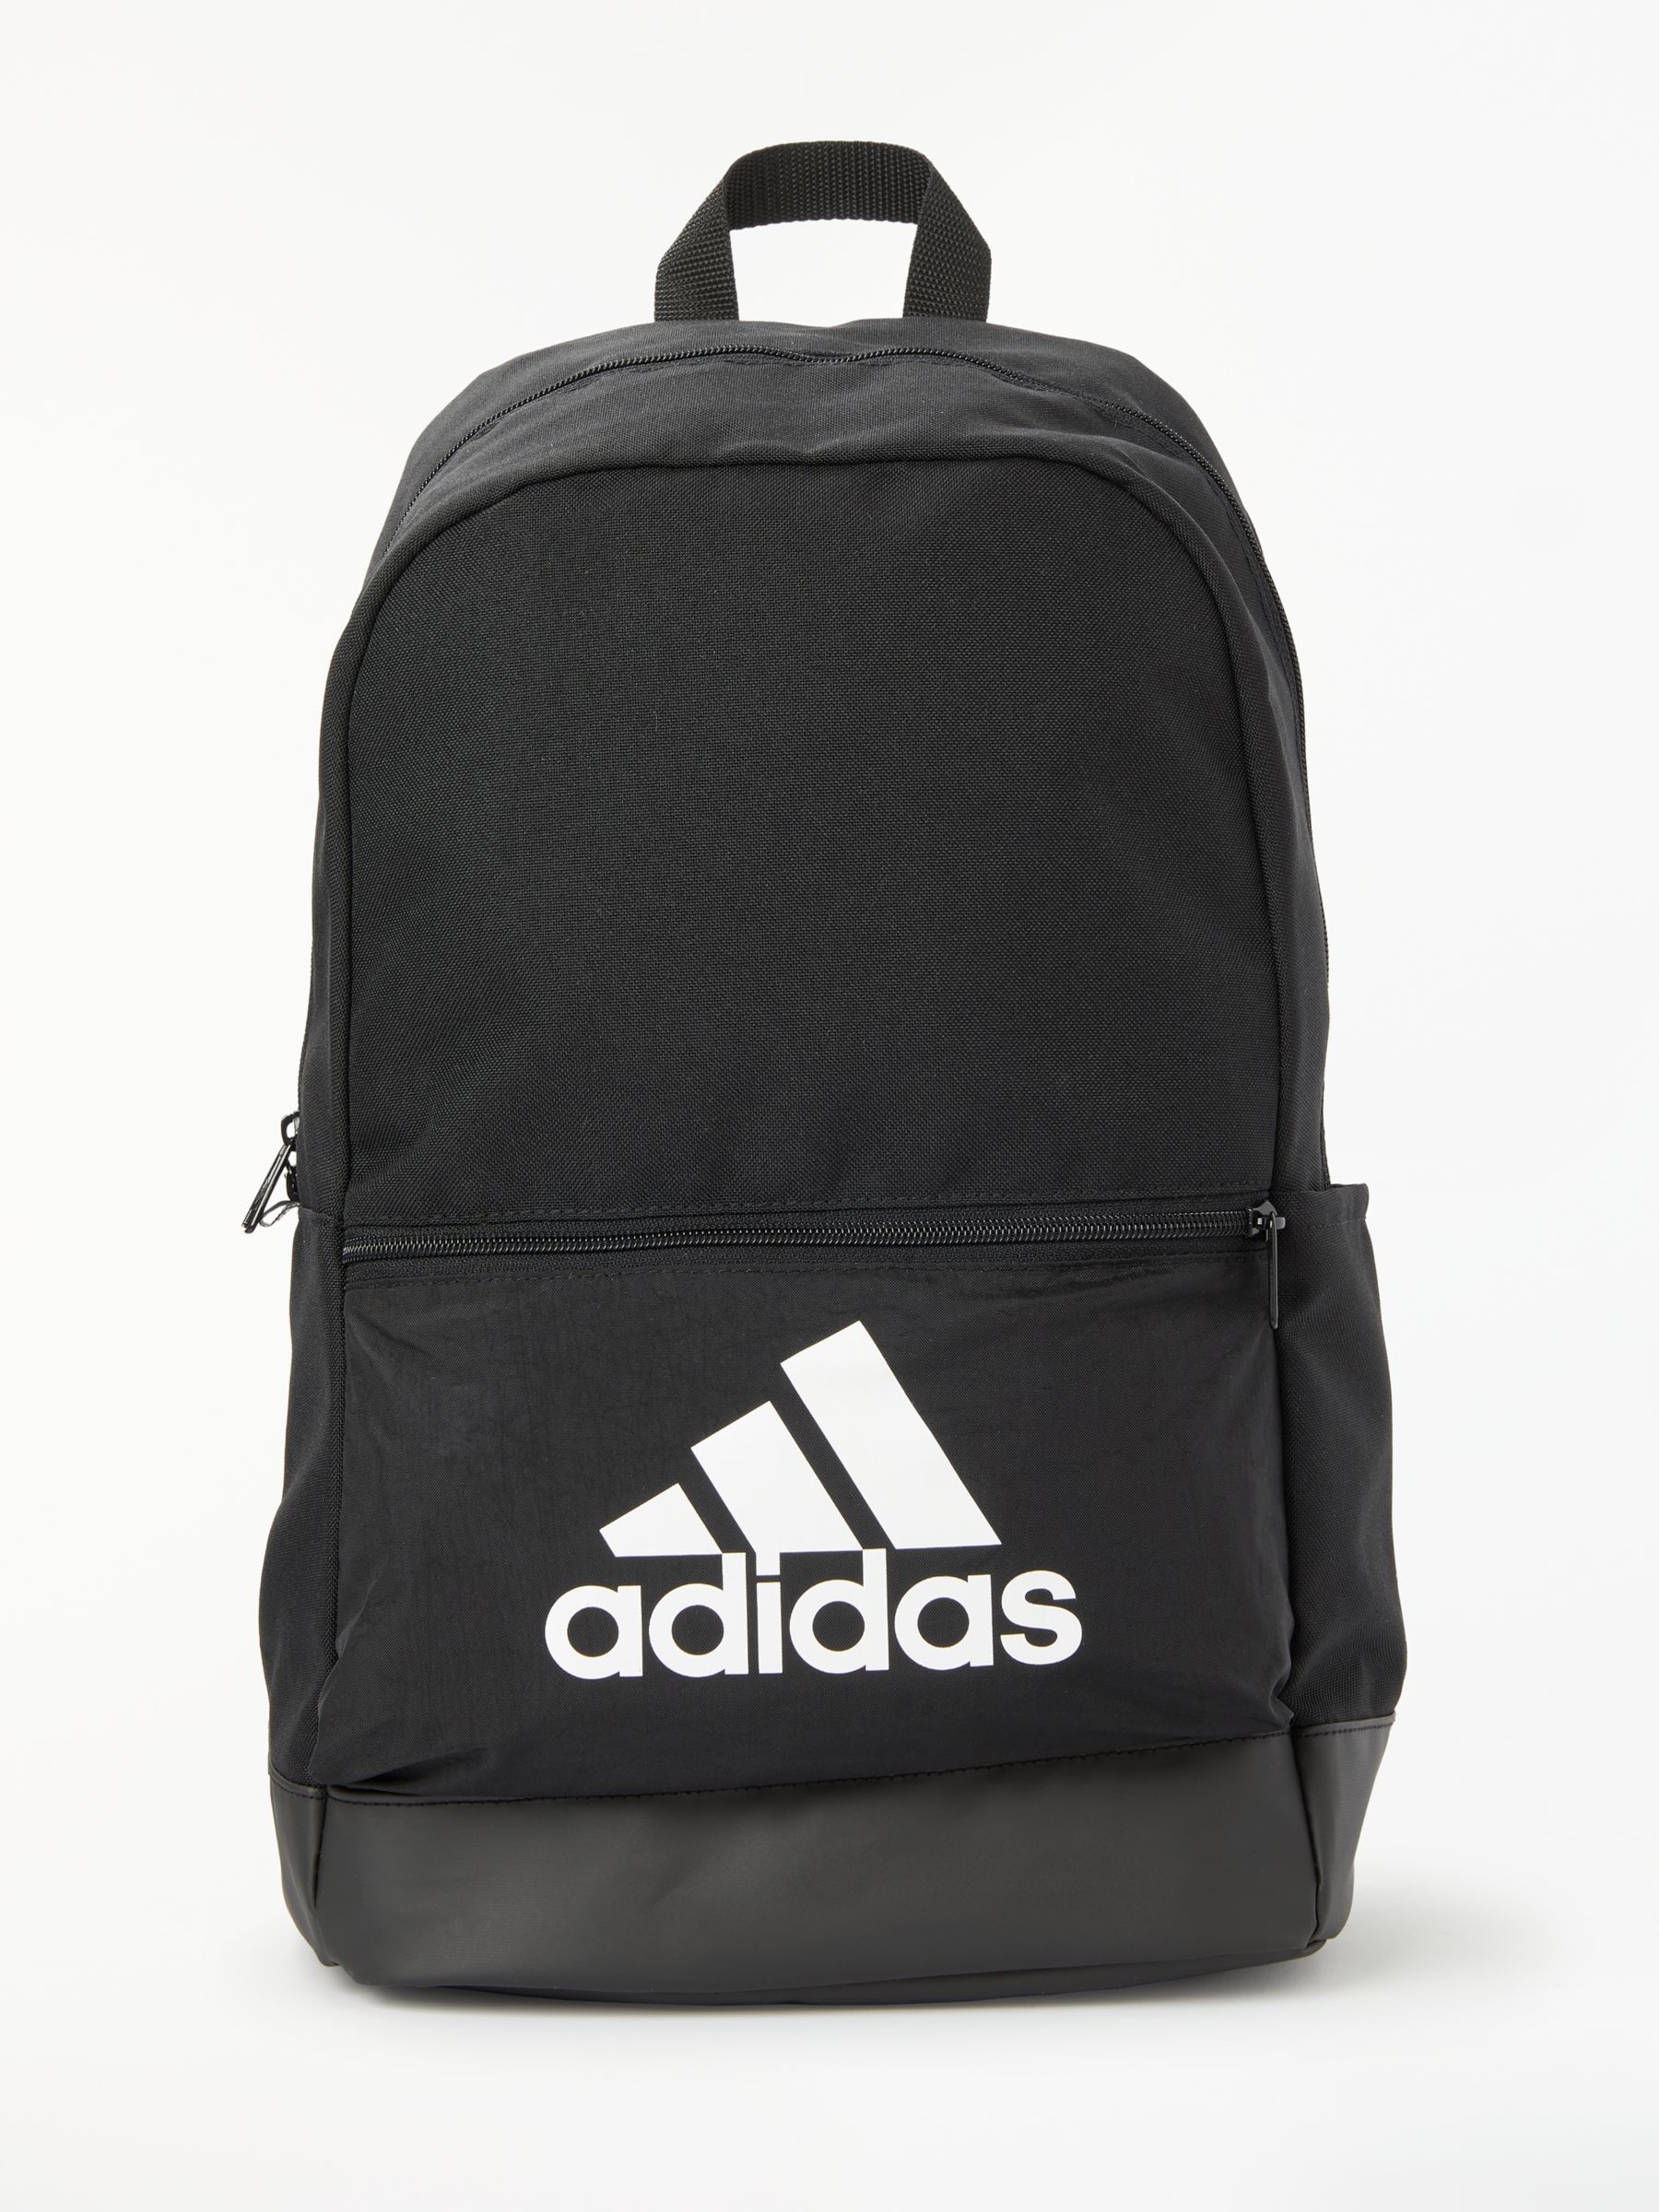 black and white adidas backpack